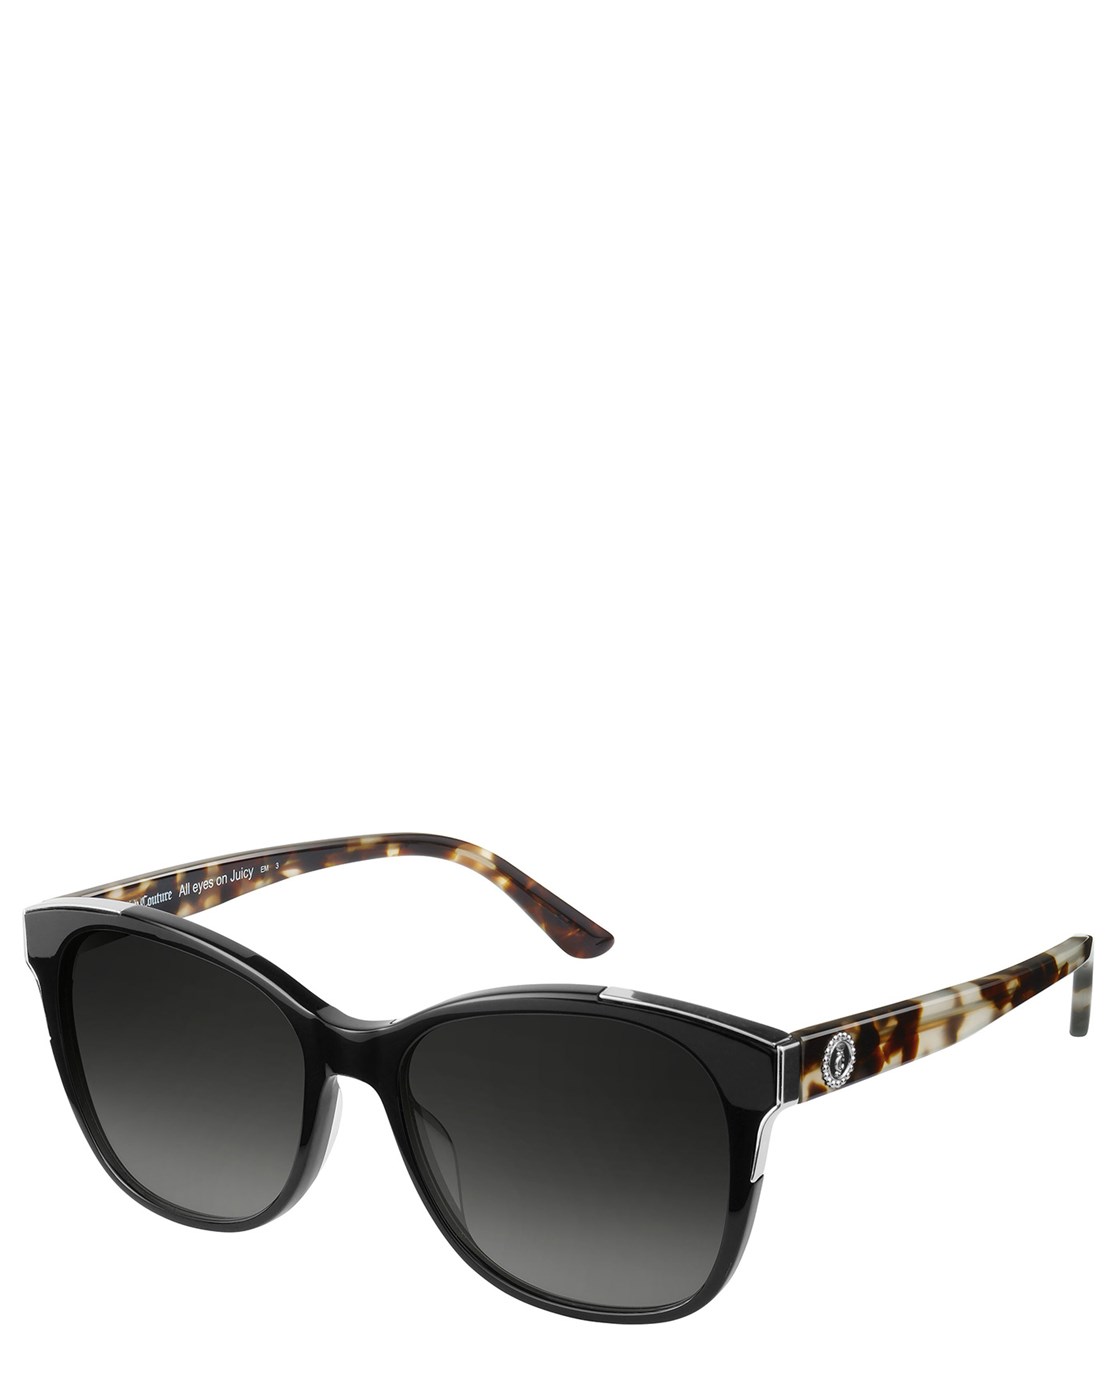 Juicy Couture Smoky Cat Eye Sunglasses